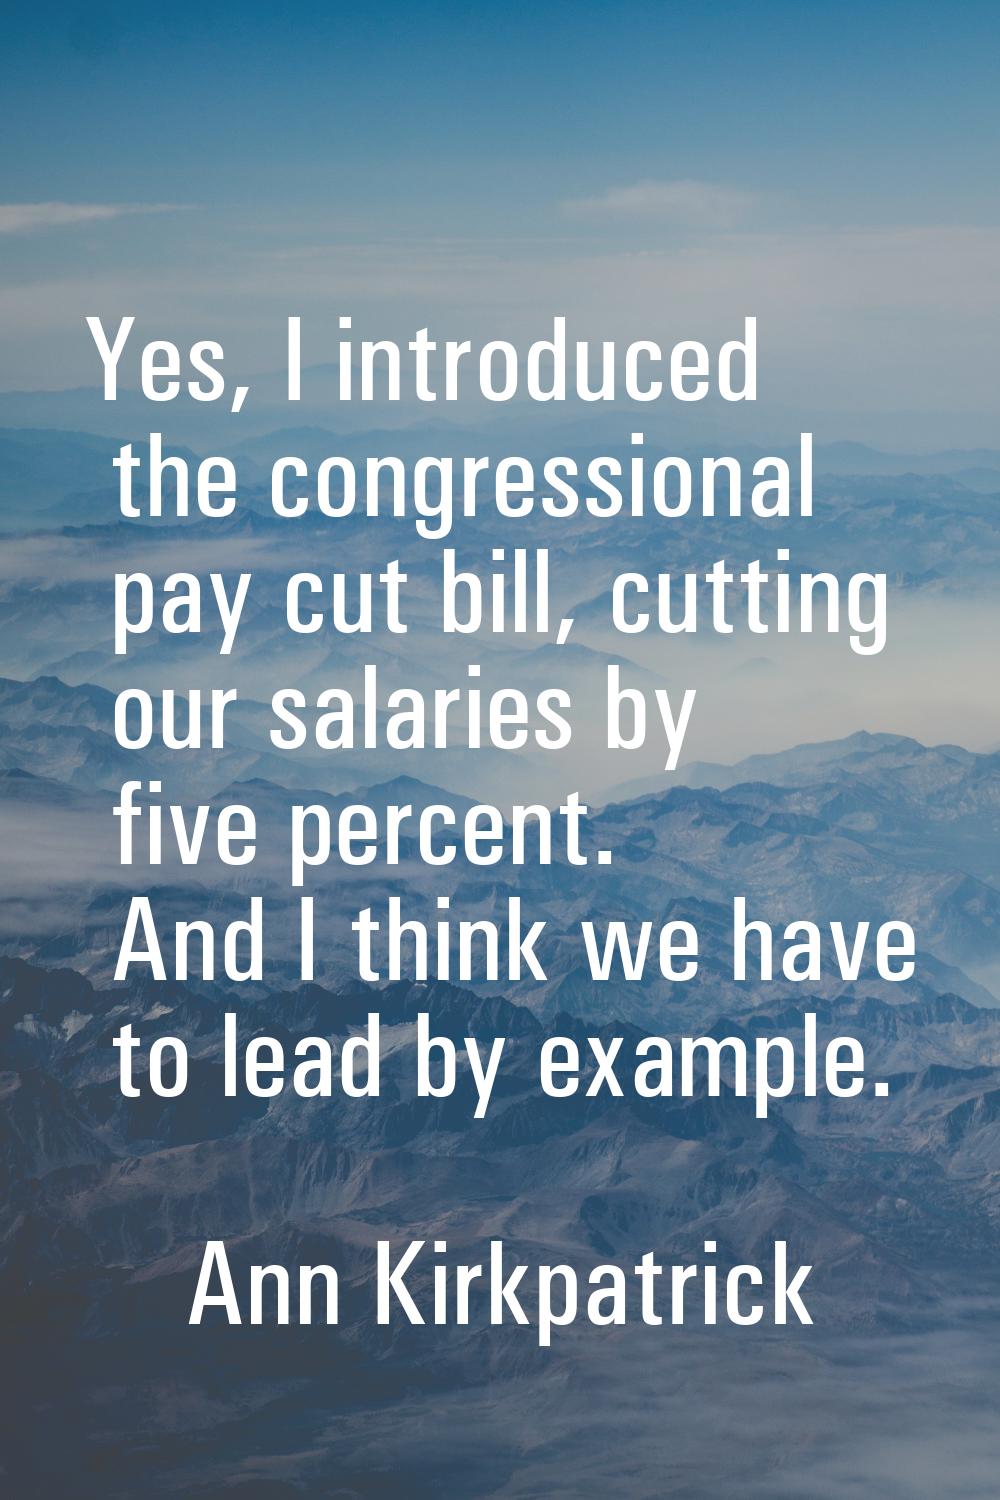 Yes, I introduced the congressional pay cut bill, cutting our salaries by five percent. And I think